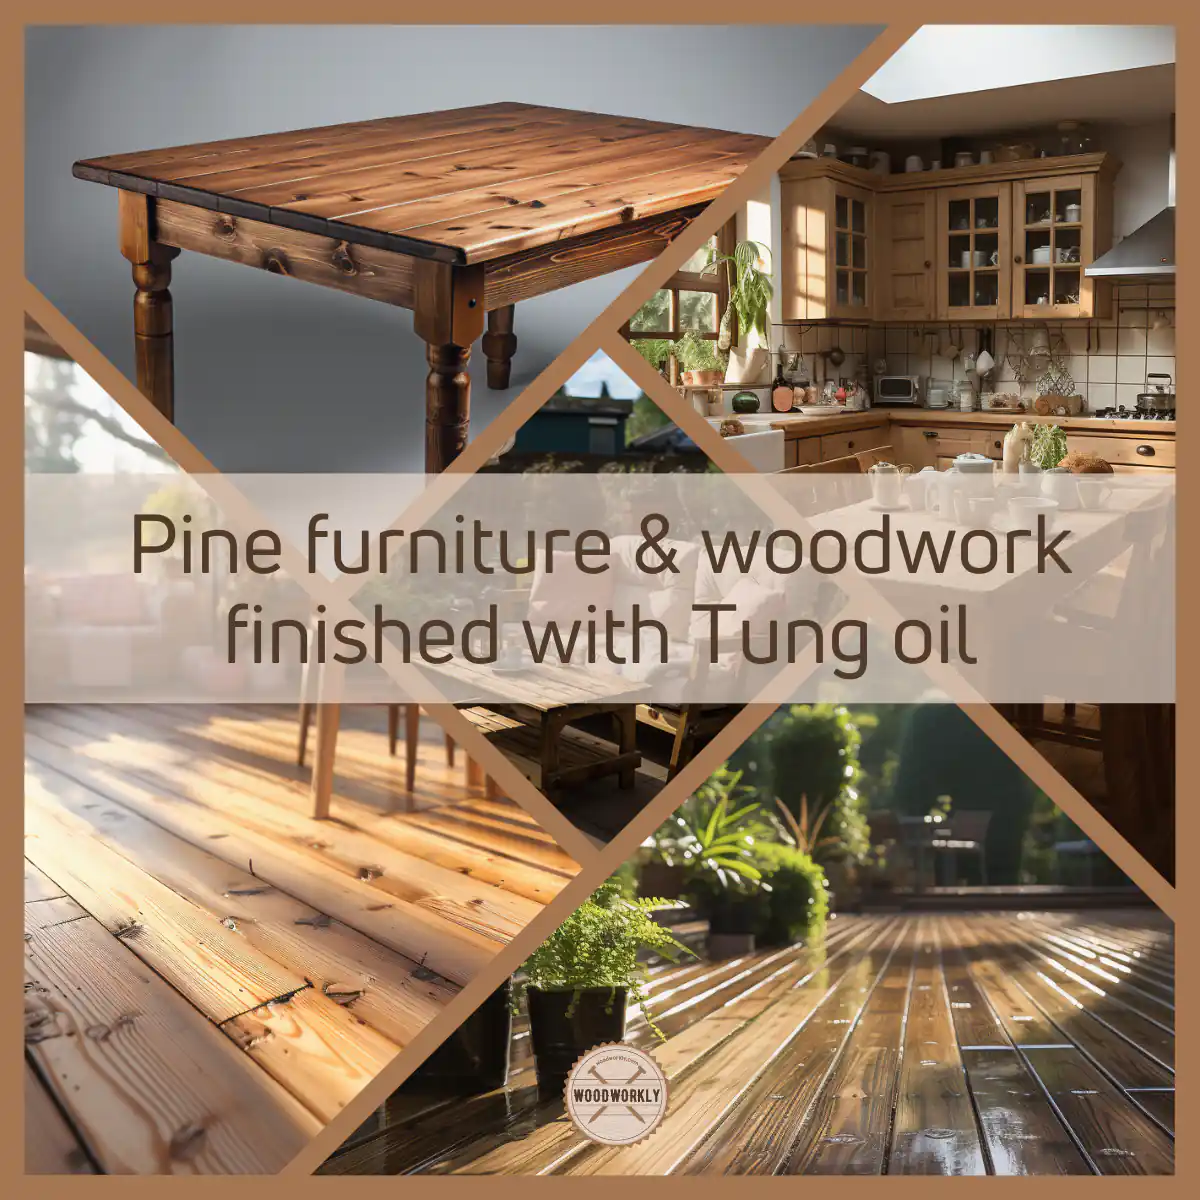 Pine furniture & woodwork finished with Tung oil